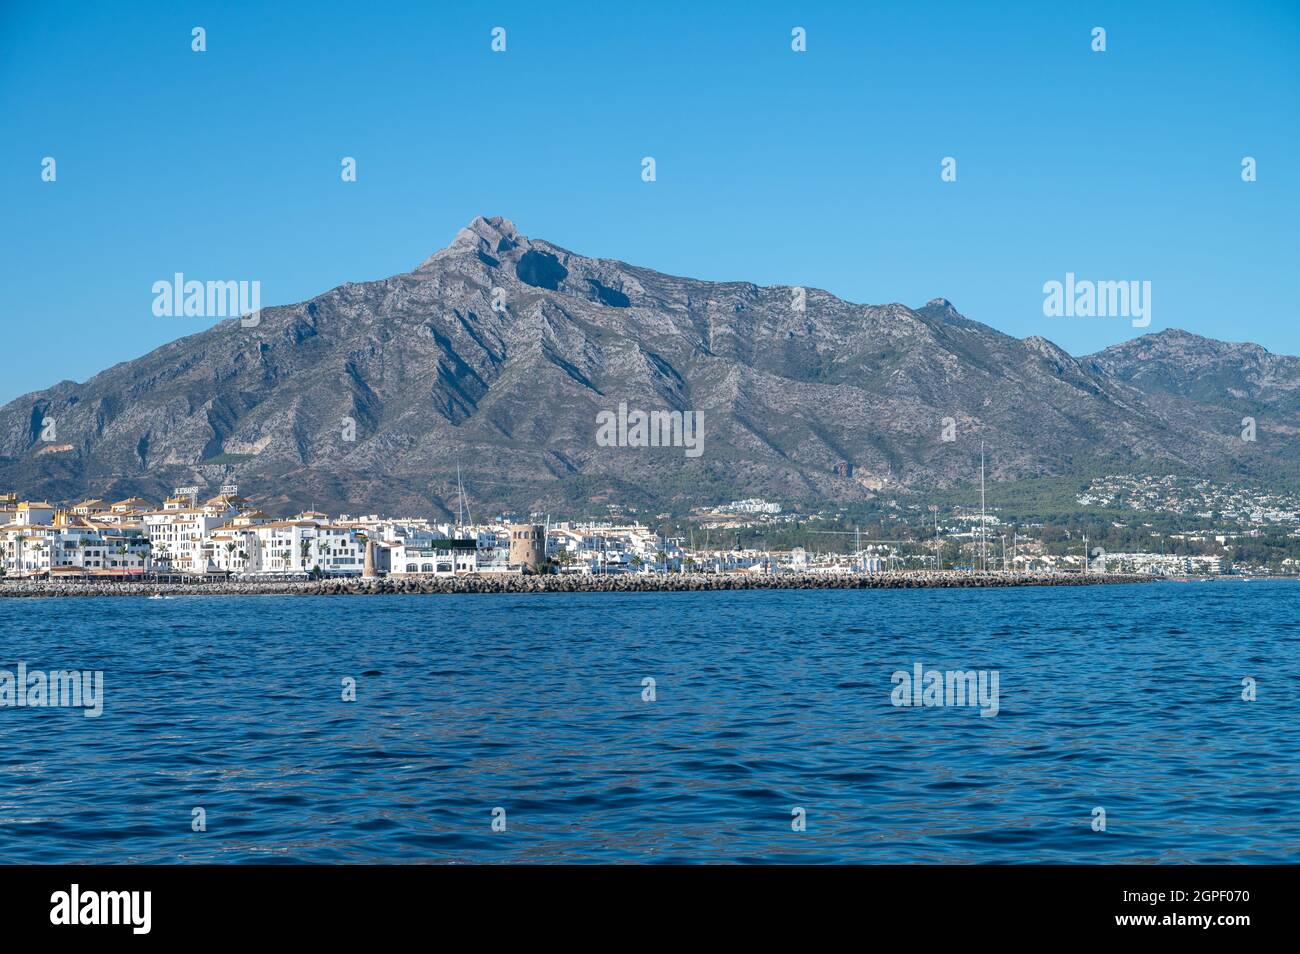 entrance of the famous port of the south of spain, puerto jose banus. the protrective wall and mast of yacths can be seing Stock Photo